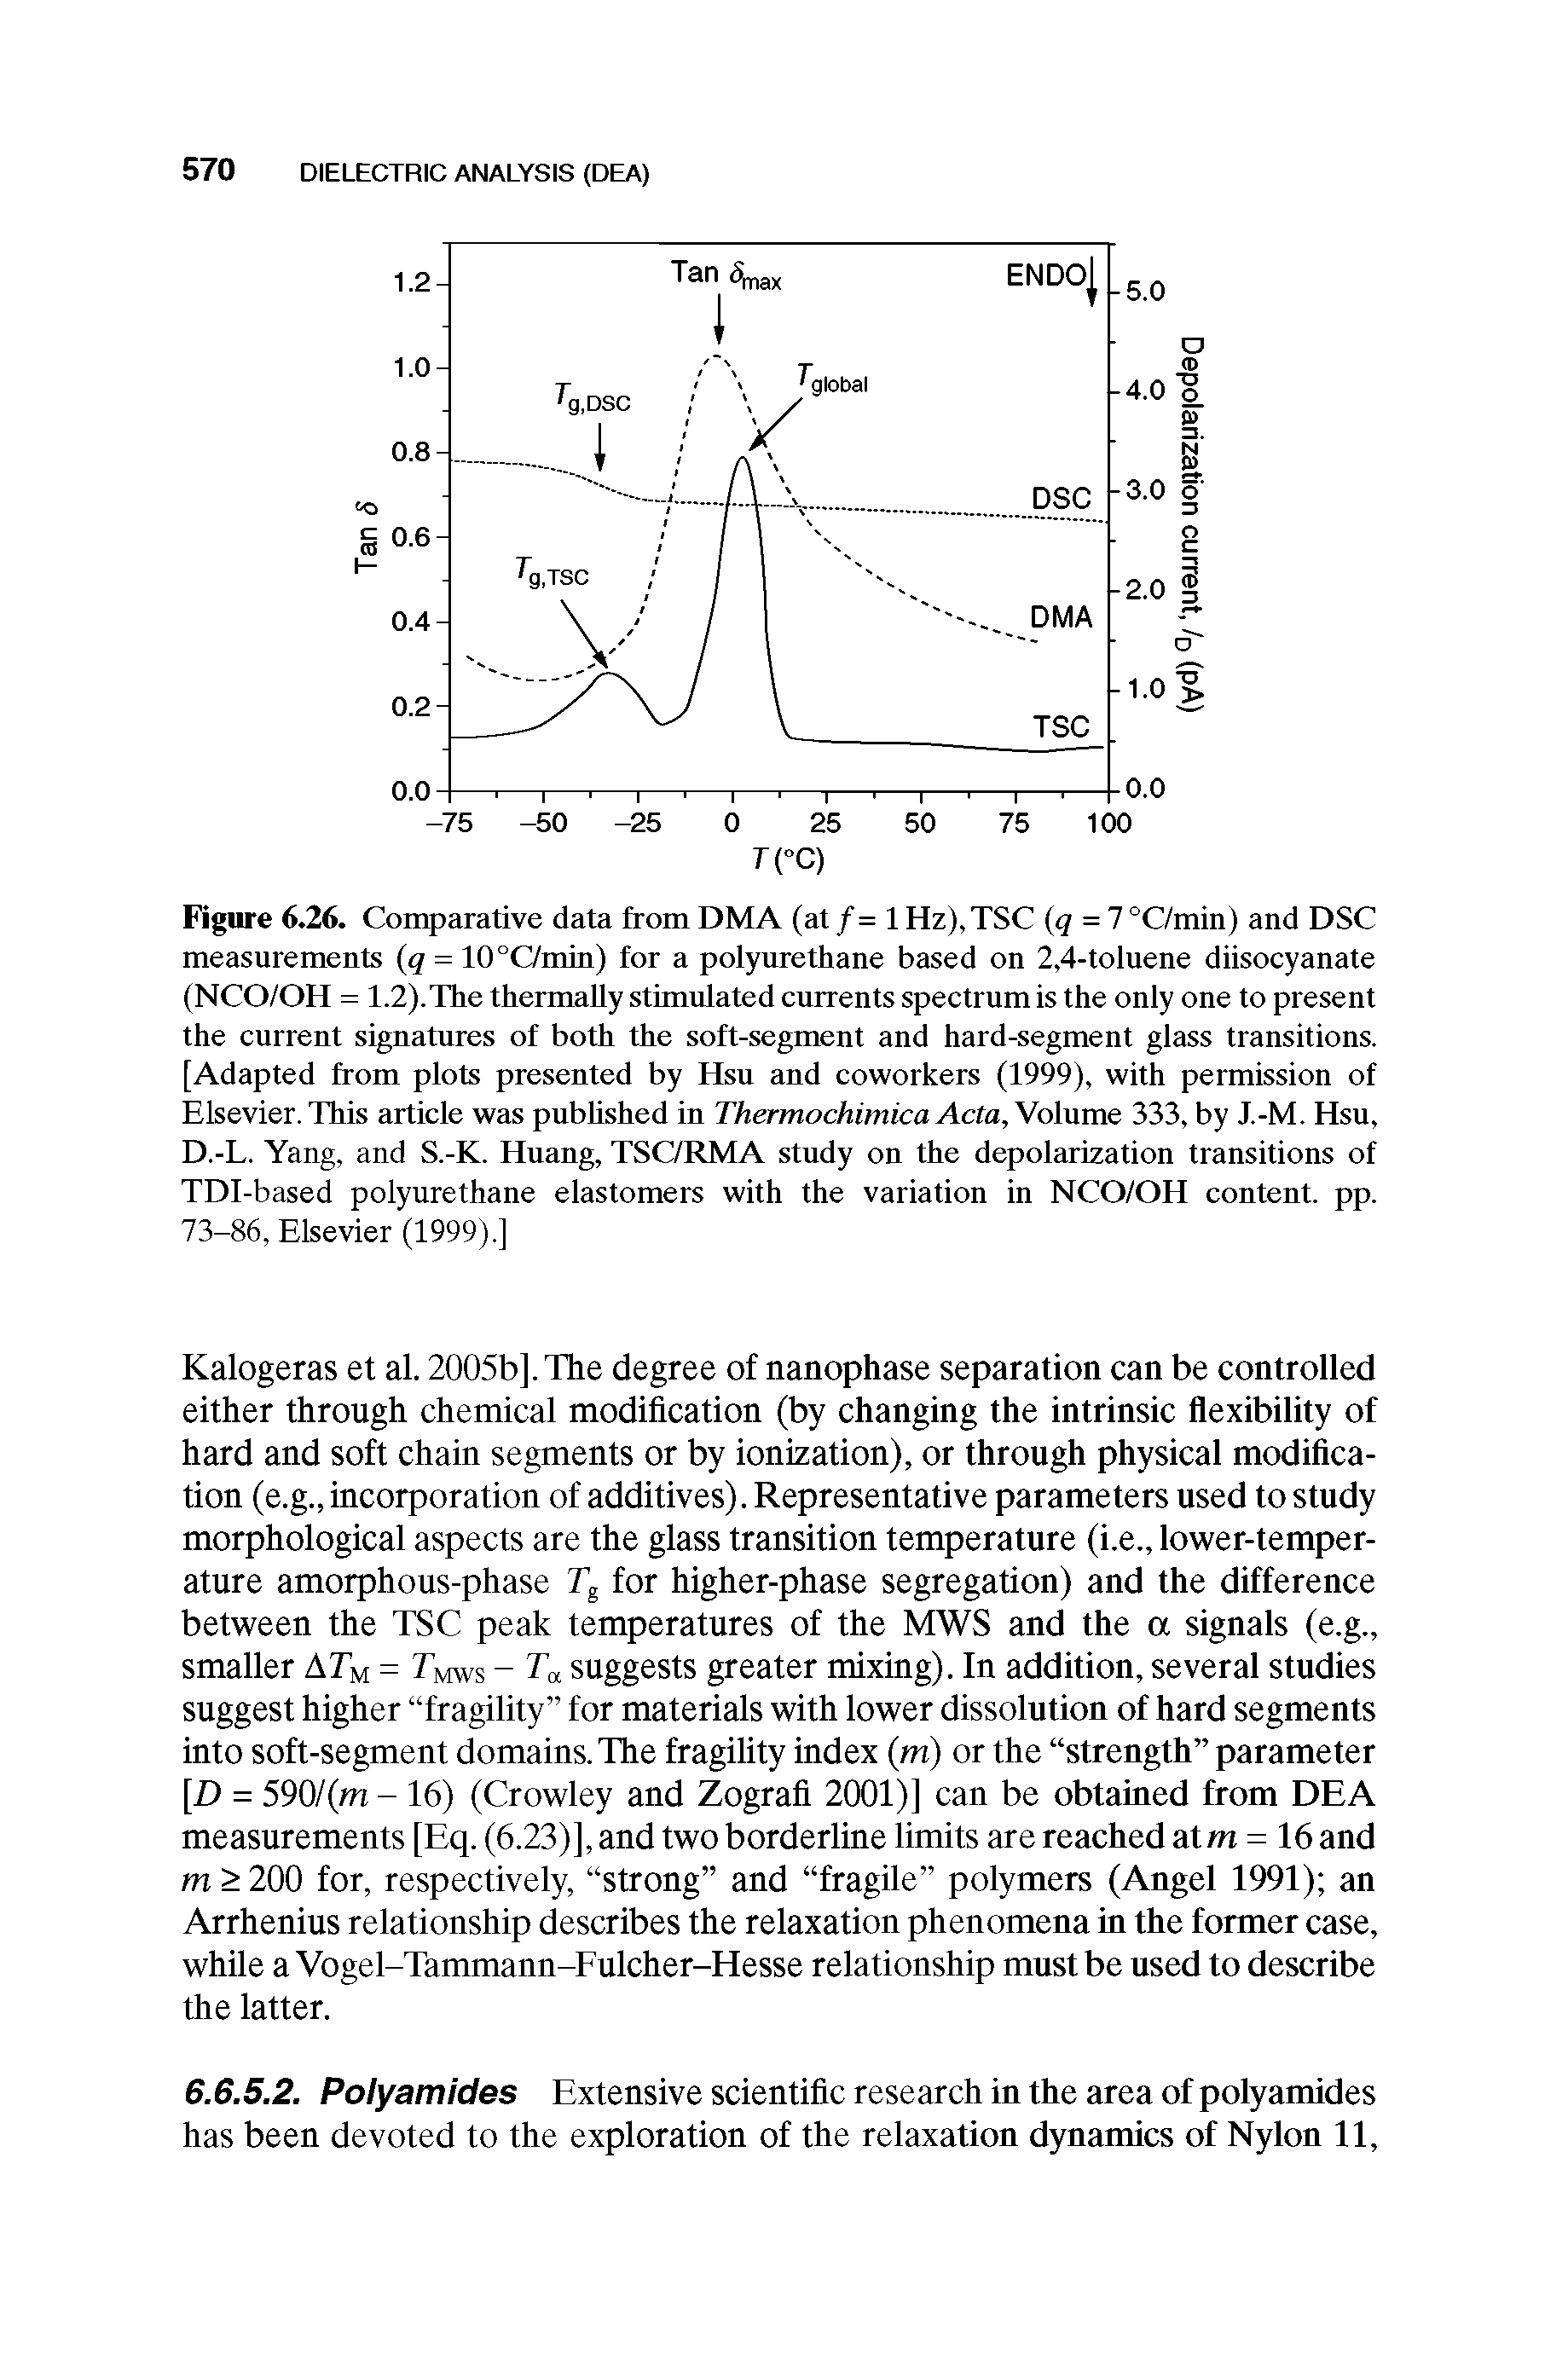 Figure 6.26. Comparative data from DMA (at/= 1 Hz),TSC q= l°C/min) and DSC measurements q = 10°C/min) for a polyurethane based on 2,4-toluene diisocyanate (NCO/OH = 1.2).The thermally stimulated currents spectrum is the only one to present the current signatures of both the soft-segment and hard-segment glass transitions. [Adapted from plots presented by Hsu and coworkers (1999), with permission of Elsevier. Tliis article was pubhshed in Thermochimica Acta, Volume 333, by J.-M. Hsu, D.-L. Yang, and S.-K. Huang, TSC/RMA study on the depolarization transitions of TDI-based polyurethane elastomers with the variation in NCO/OH content, pp. 73-86, Elsevier (1999).]...